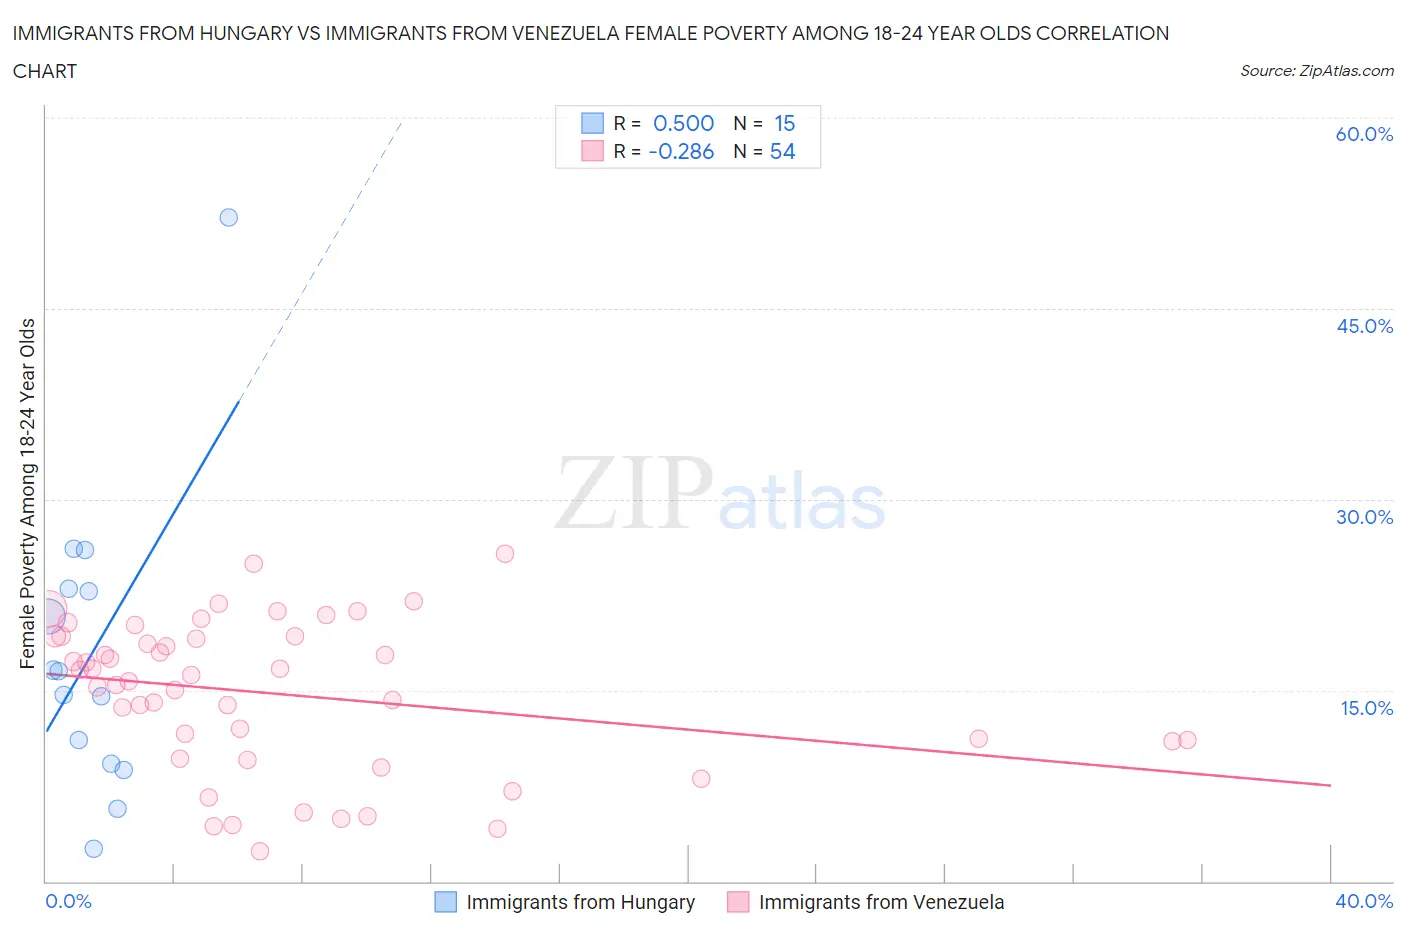 Immigrants from Hungary vs Immigrants from Venezuela Female Poverty Among 18-24 Year Olds